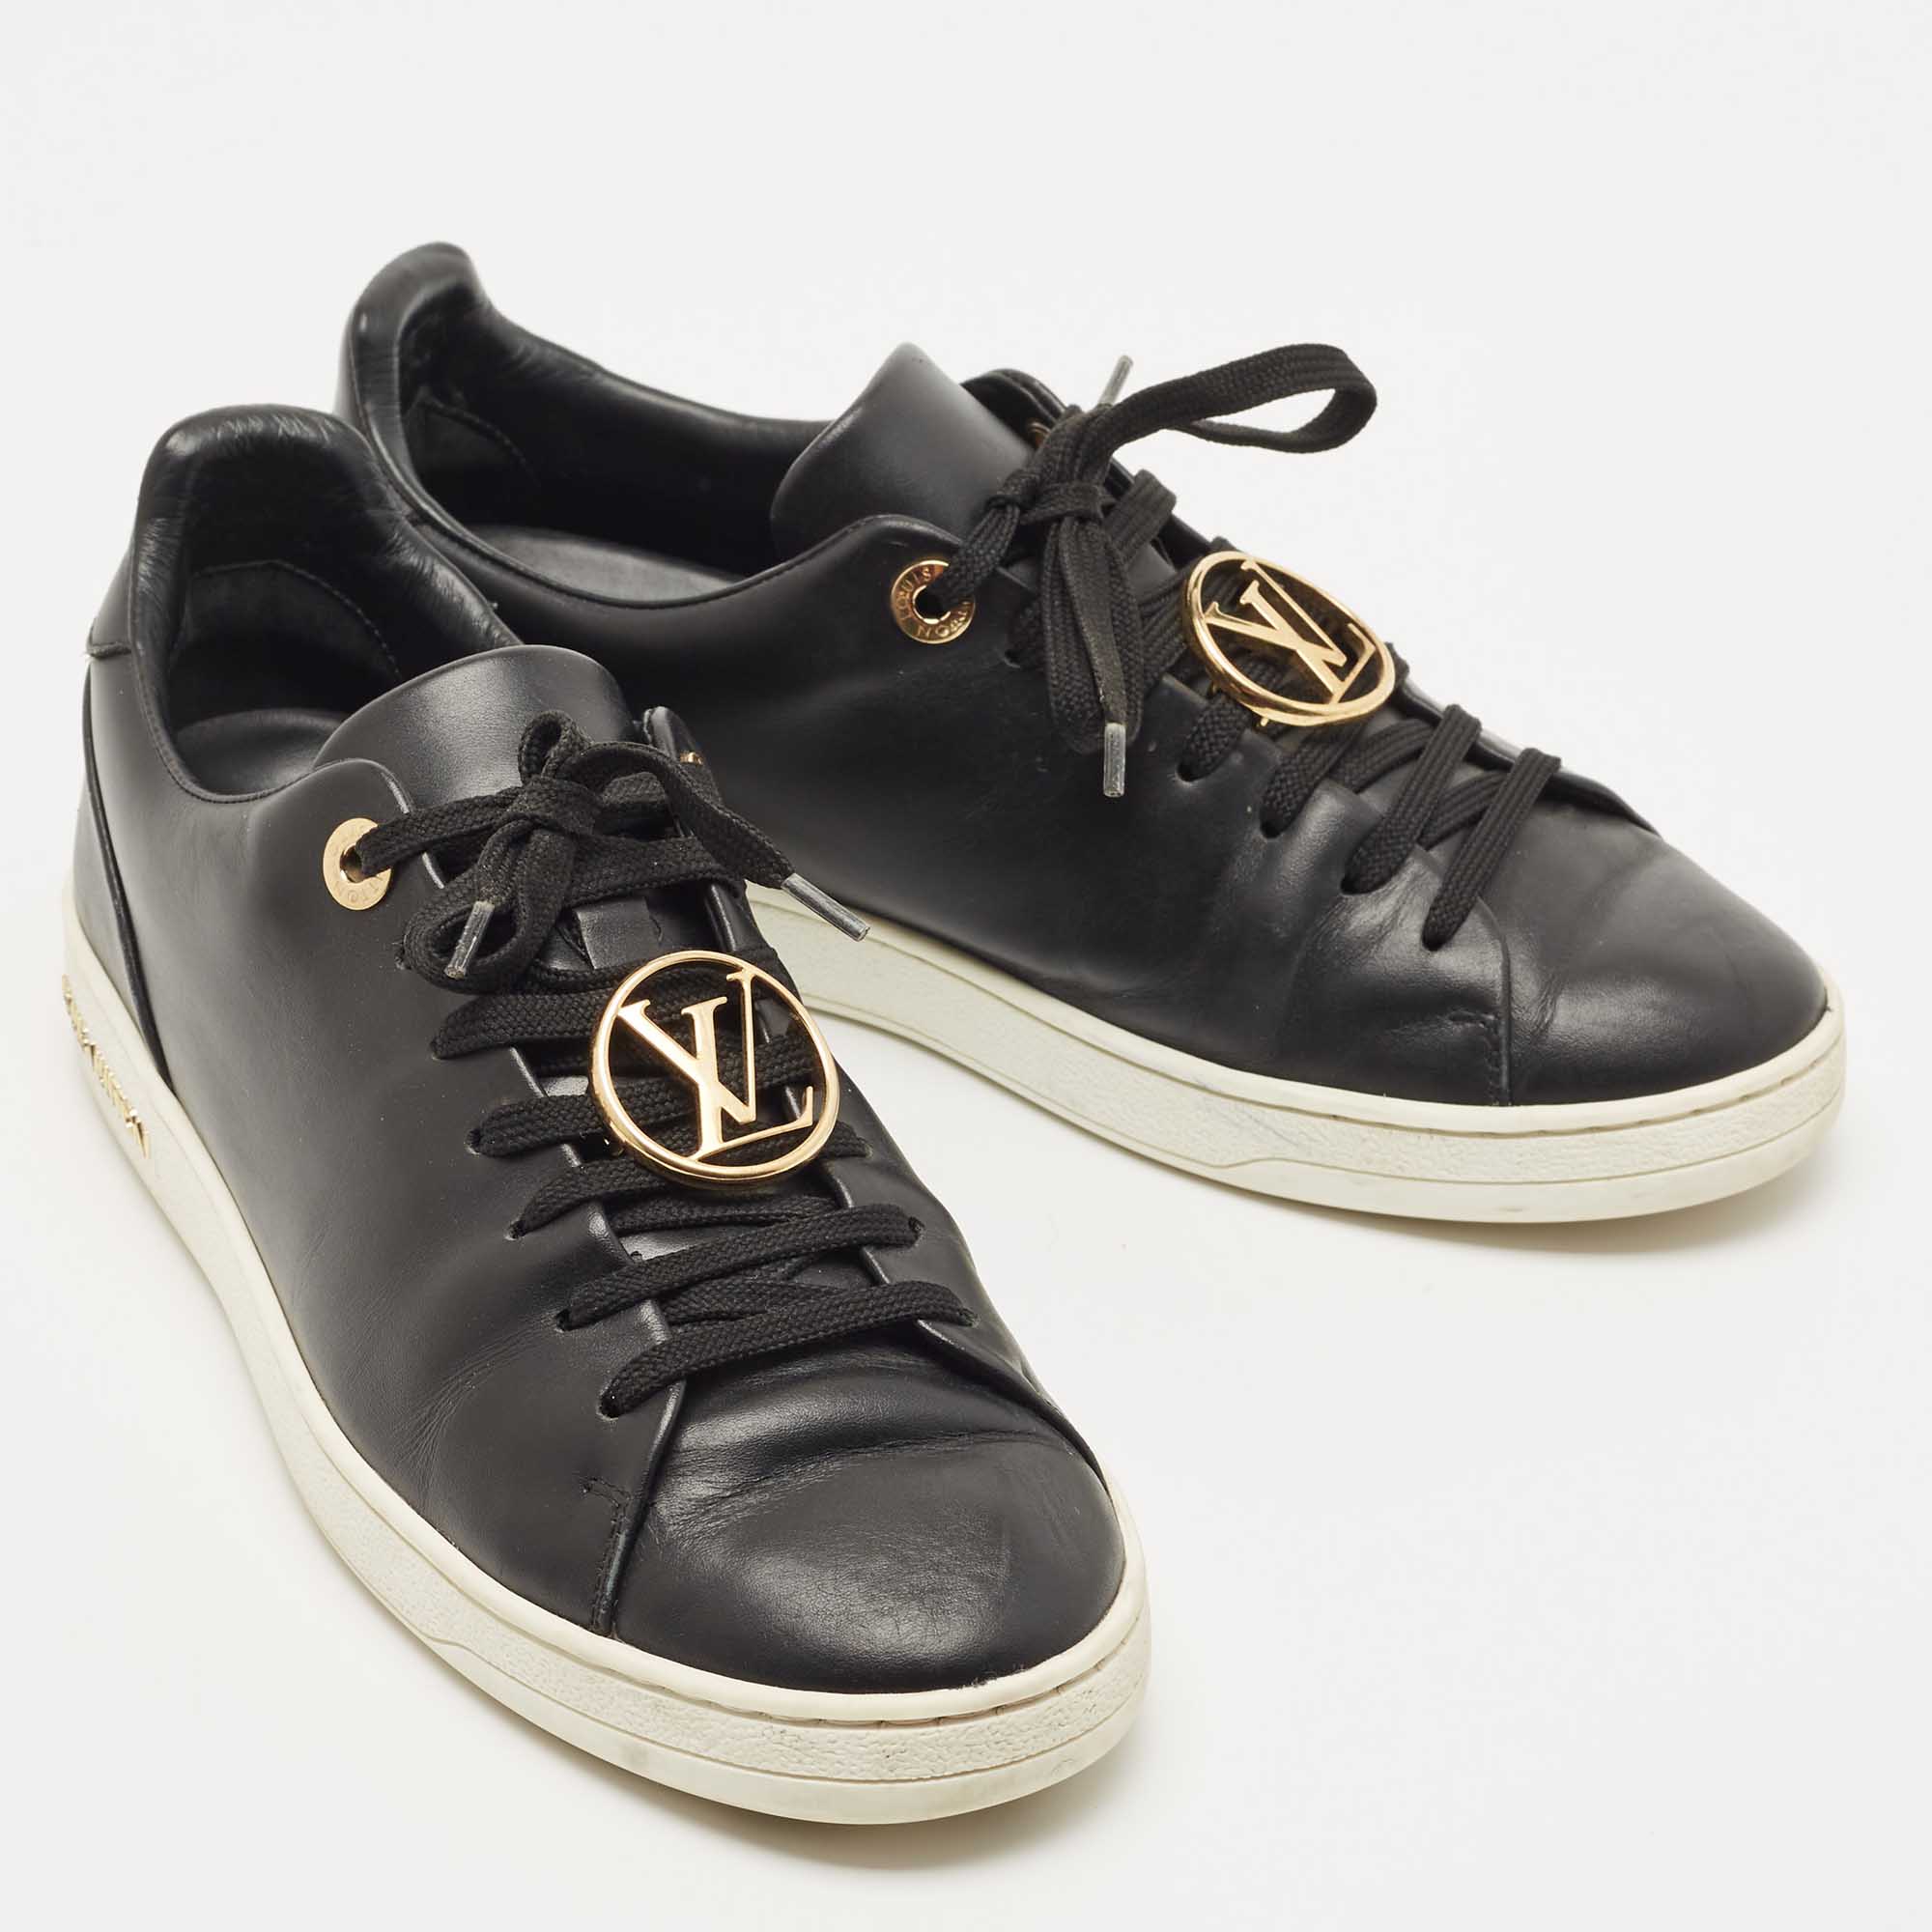 Louis Vuitton Black Leather Frontrow Sneakers Size 36.5